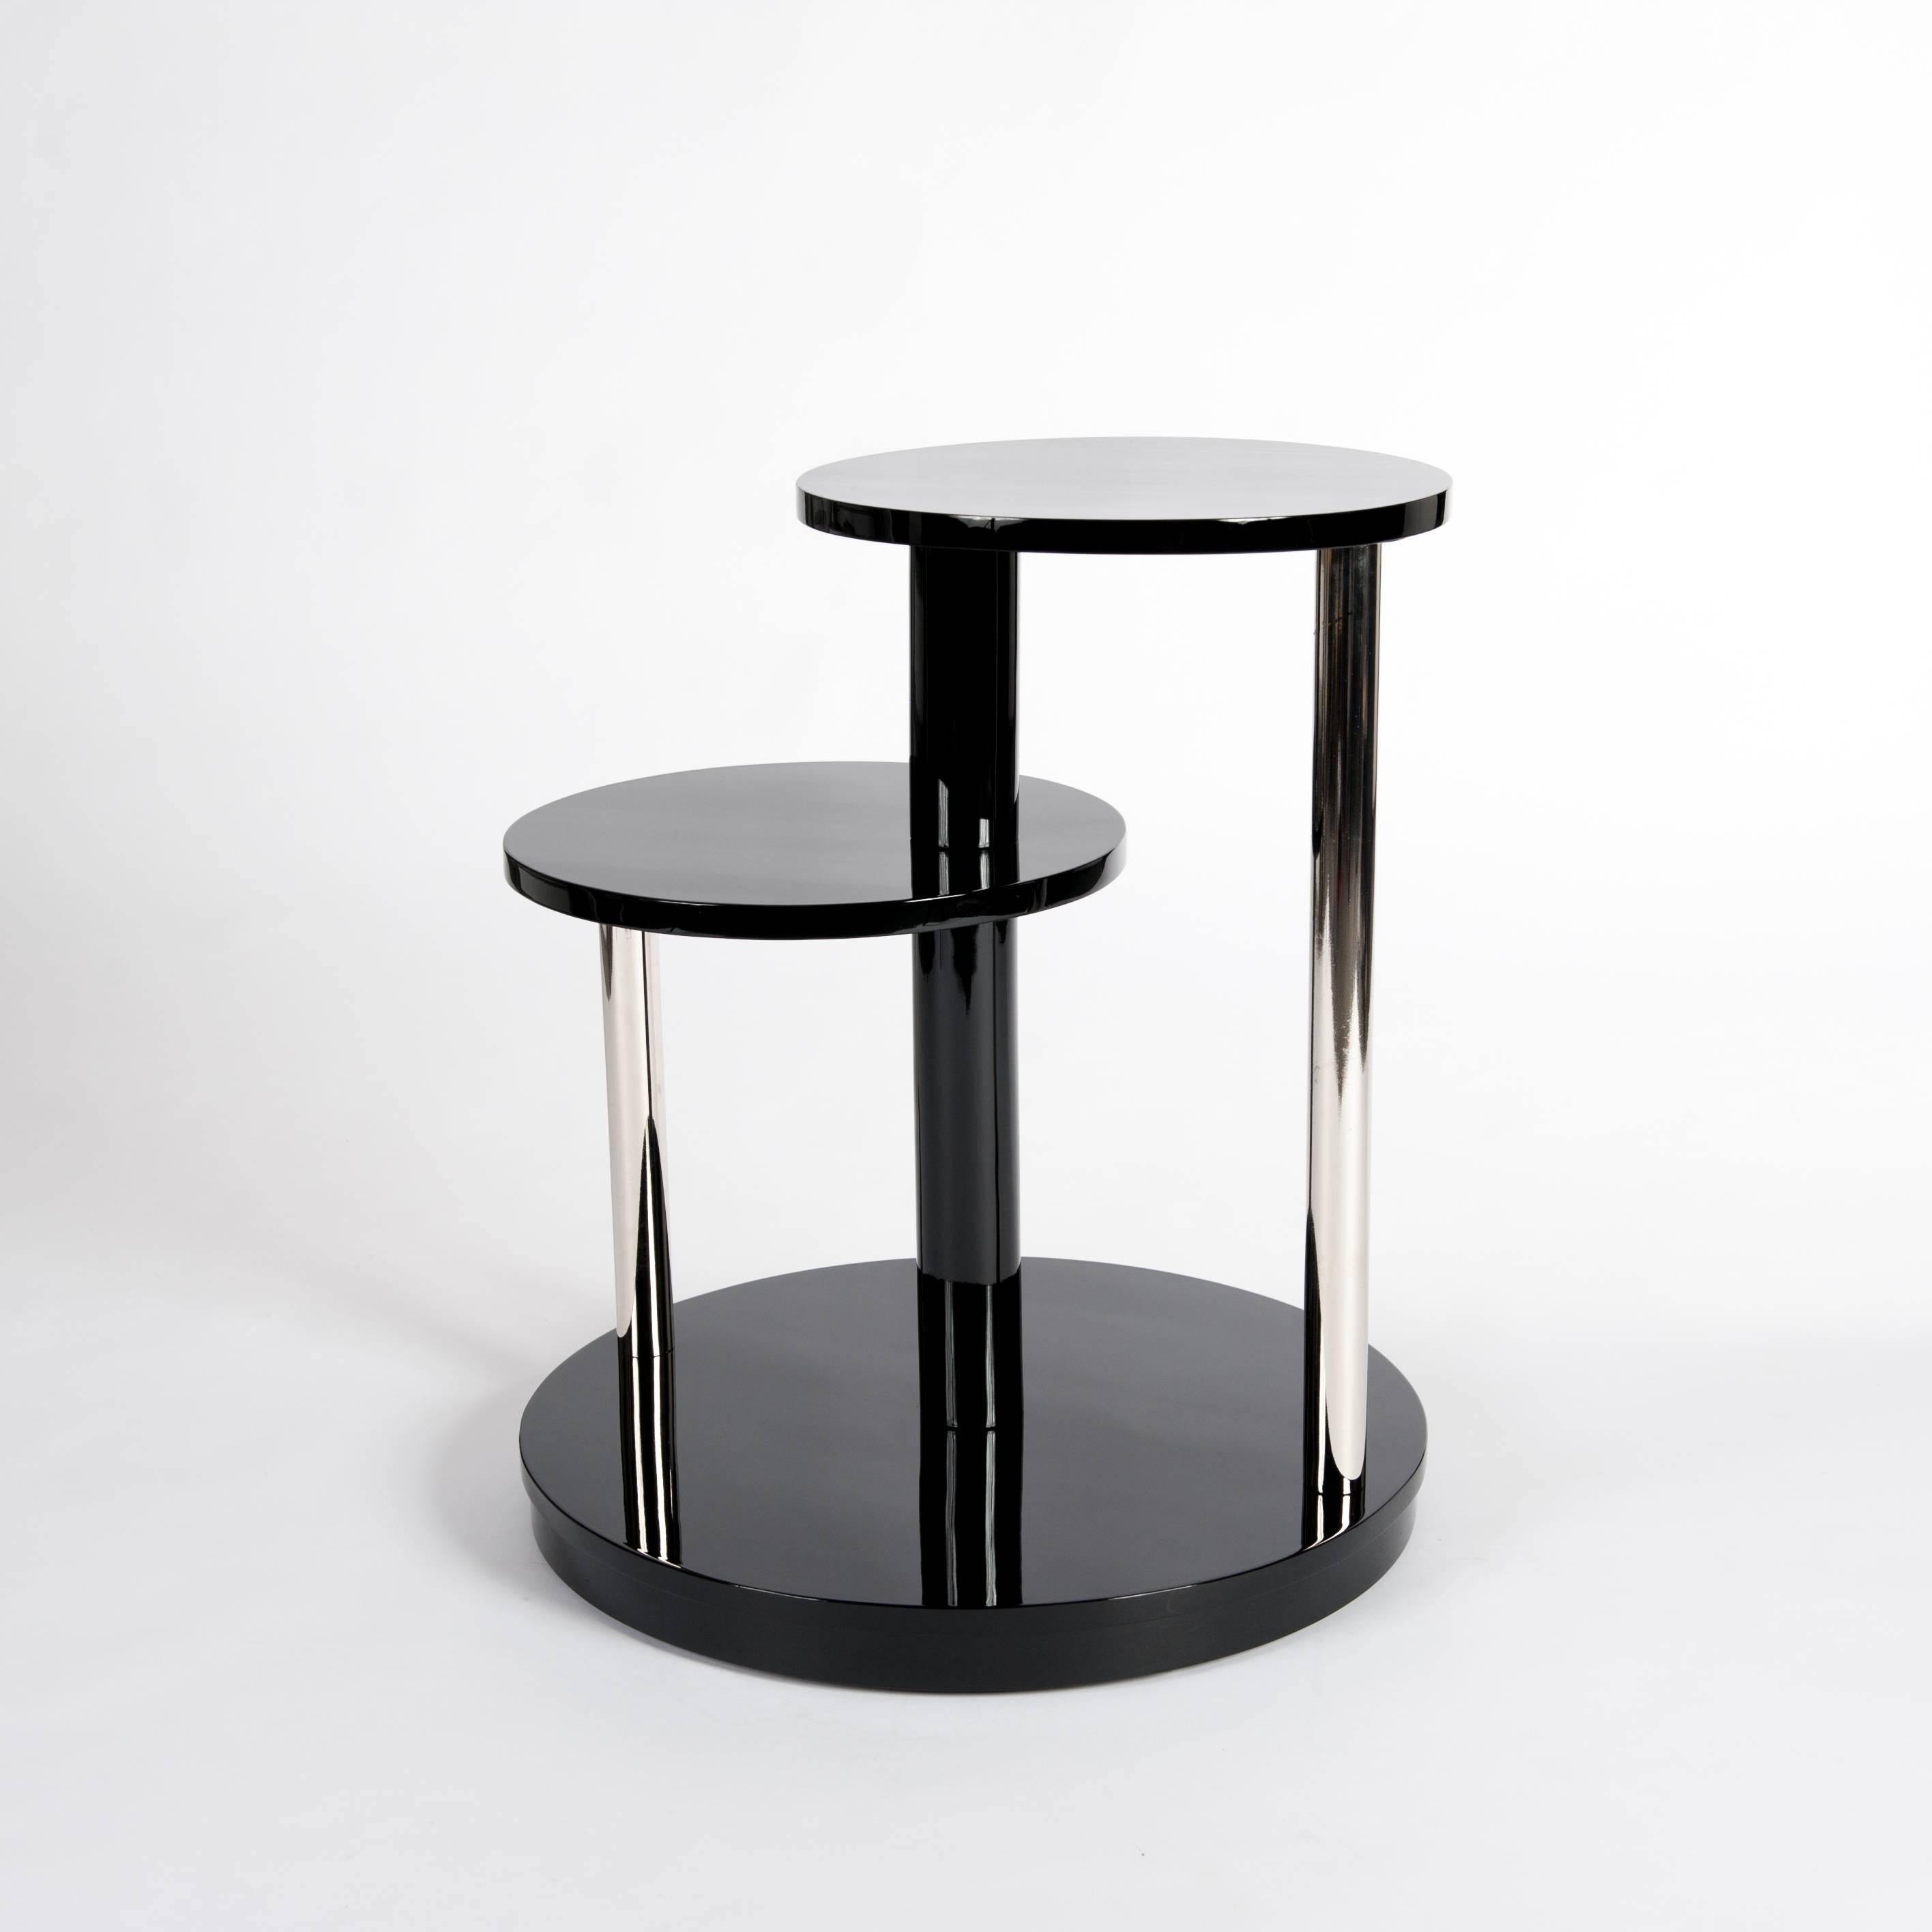 Art Deco French Art Déco Coffee Table or Side Table black high gloss lacquer 1933 For Sale